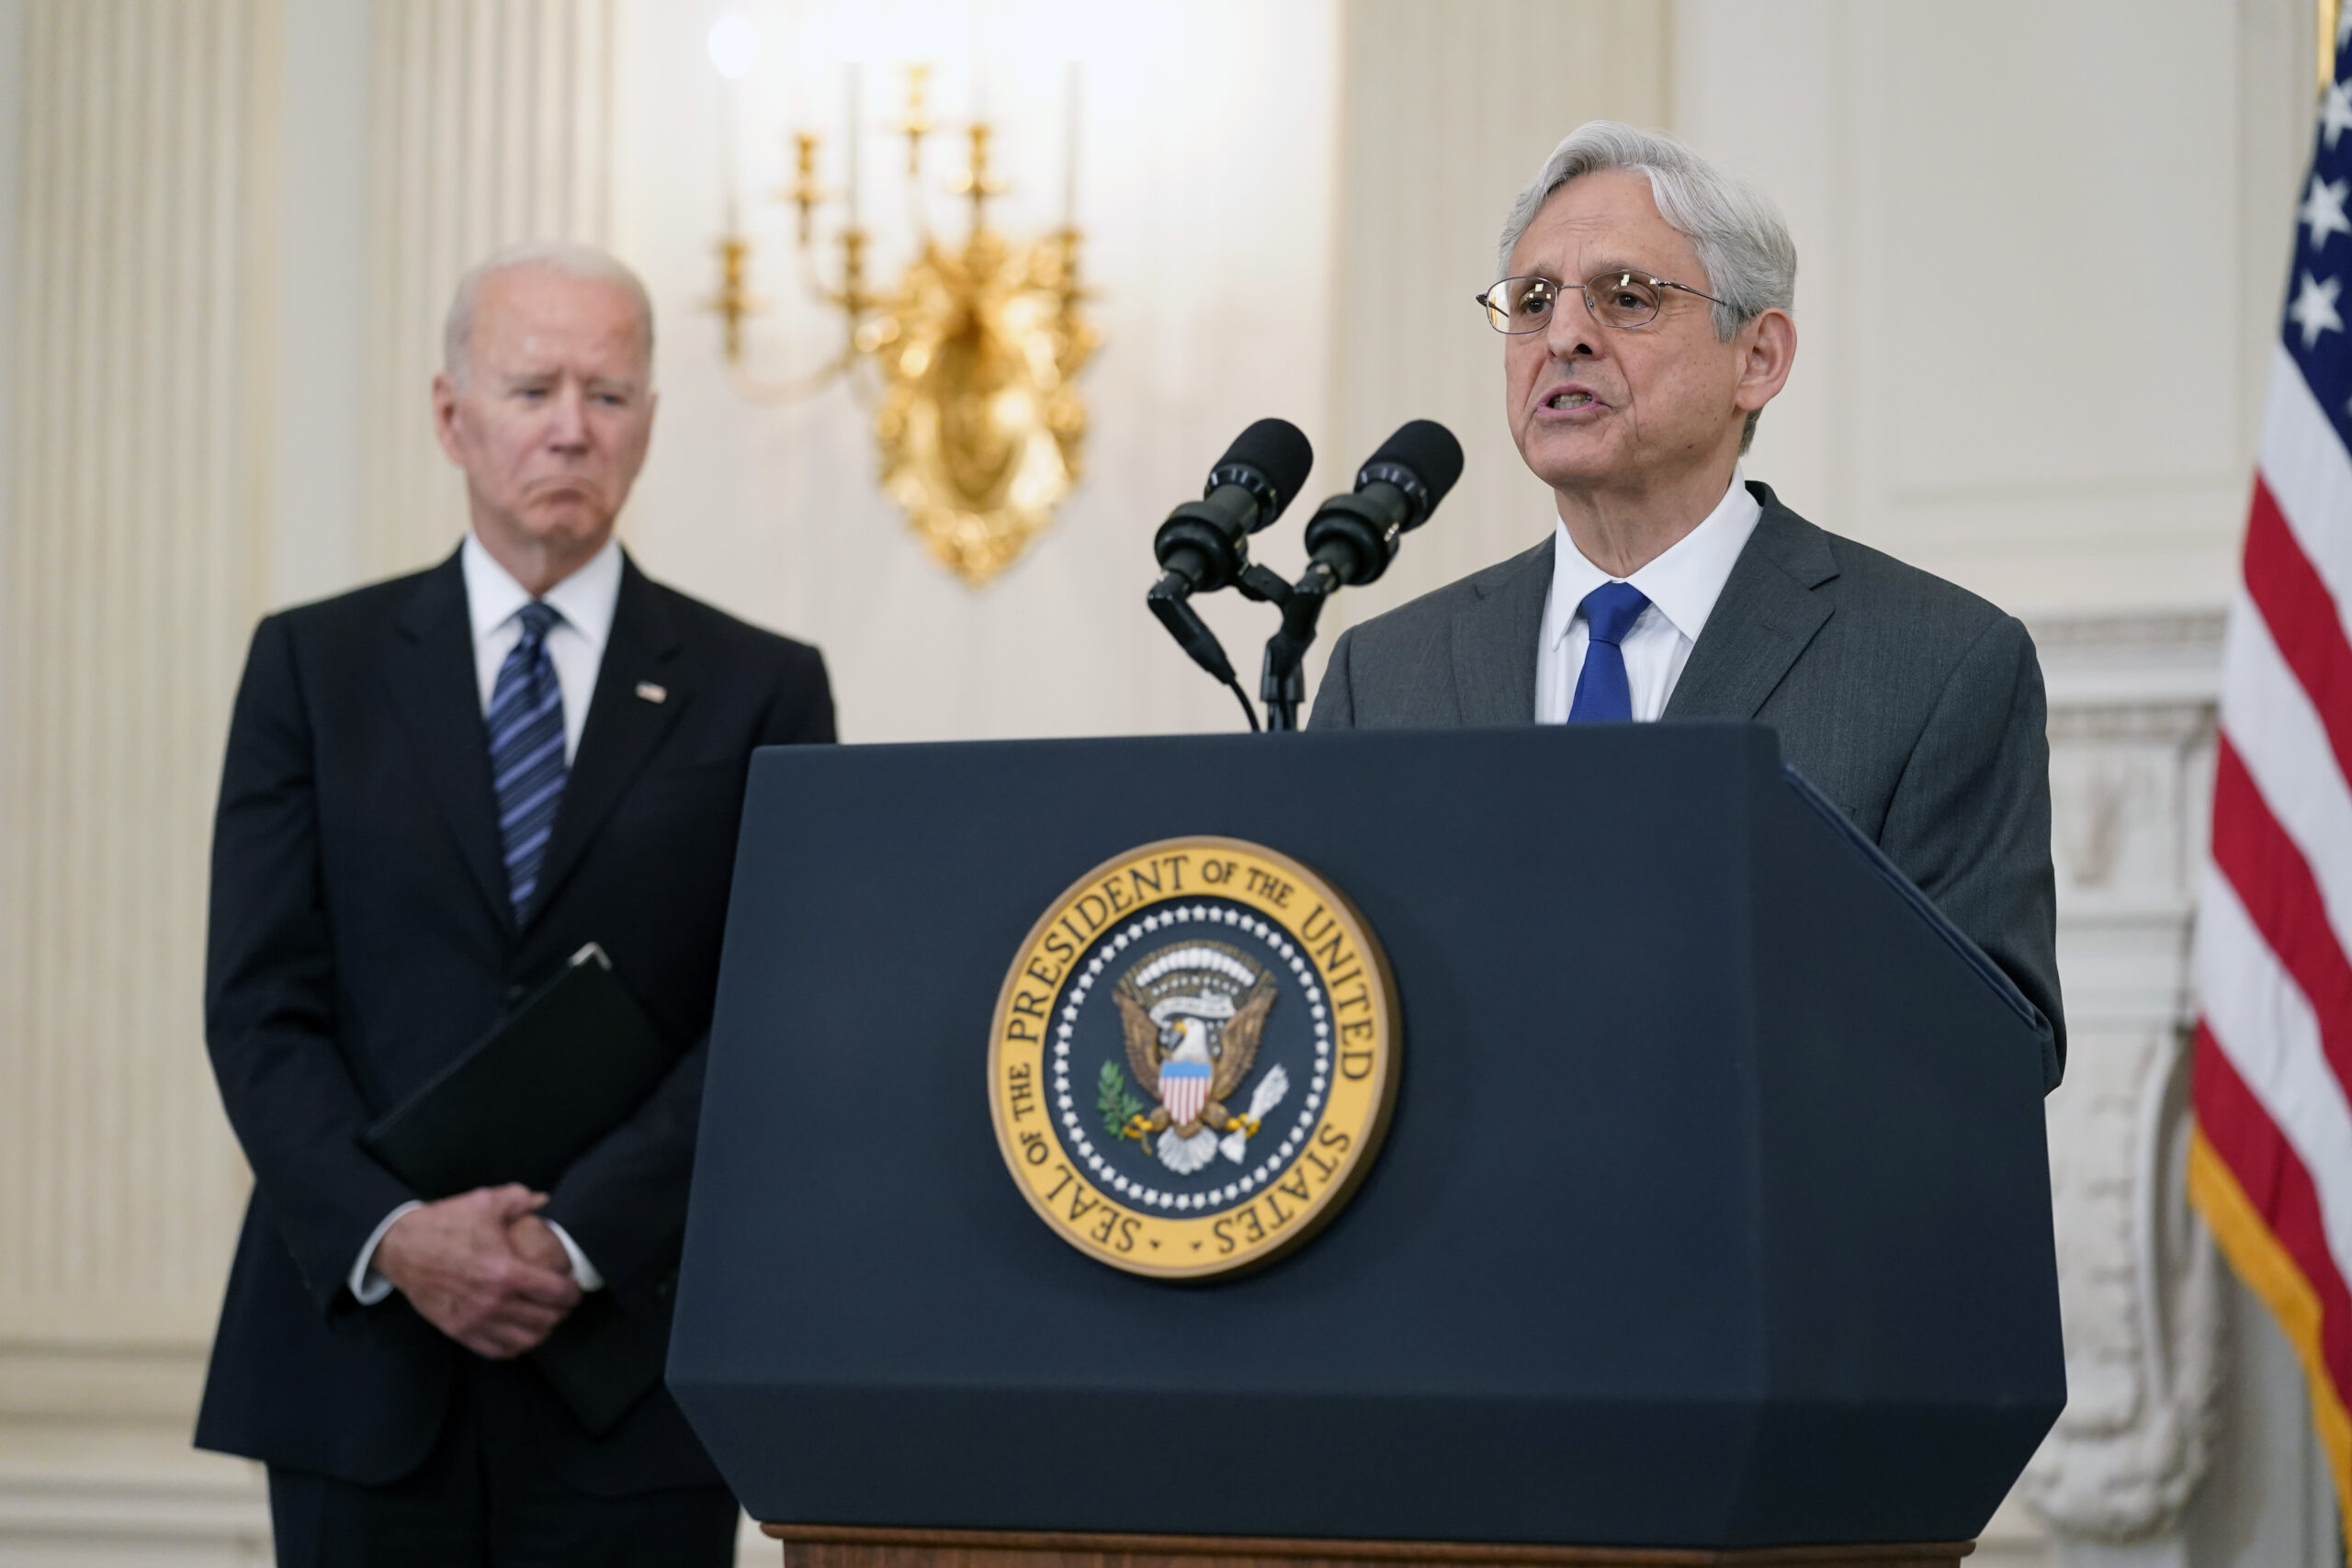 Biden Is Reportedly Growing Frustrated with Merrick Garland: ‘This Has Been Building for a While’ (mediaite.com)